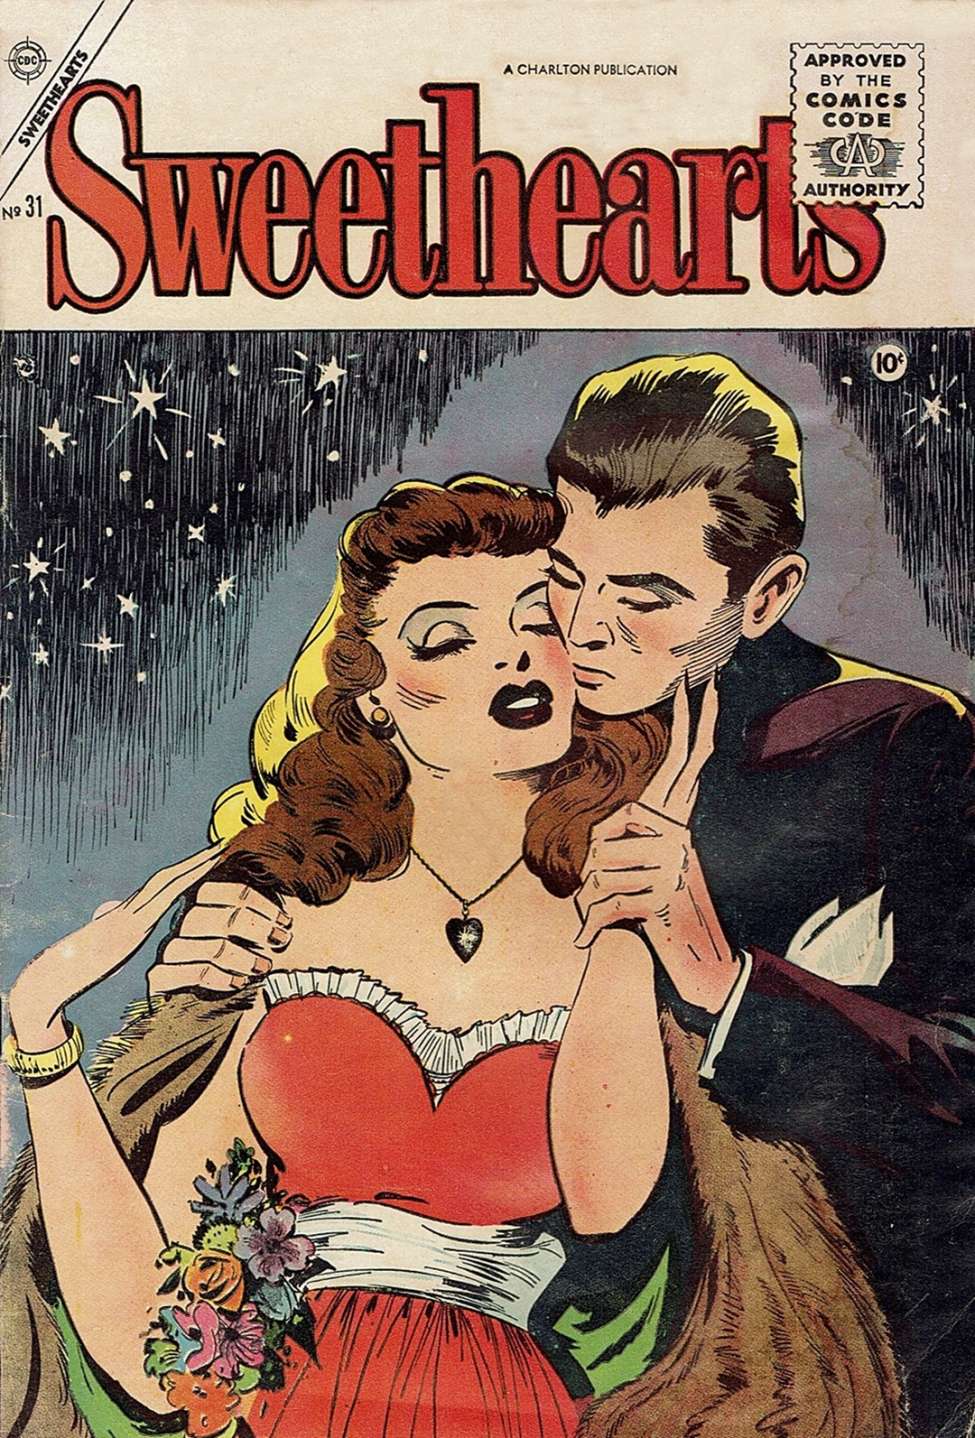 Comic Book Cover For Sweethearts 31 - Version 1